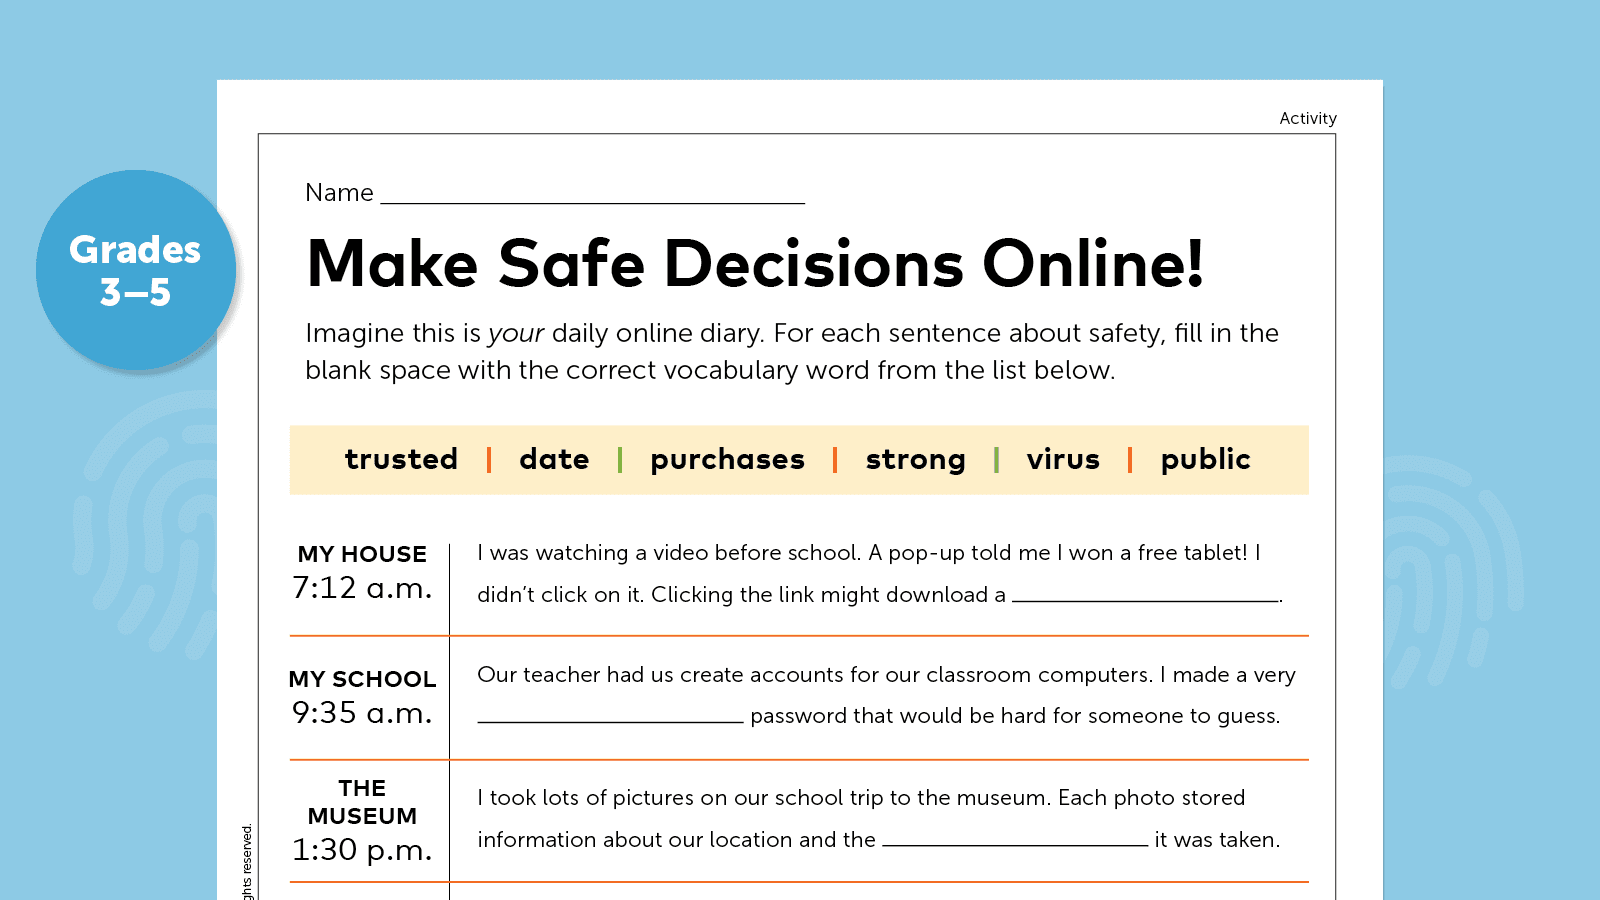 (opens in a new tab) Lesson Plan & Activity: Staying Safe Online